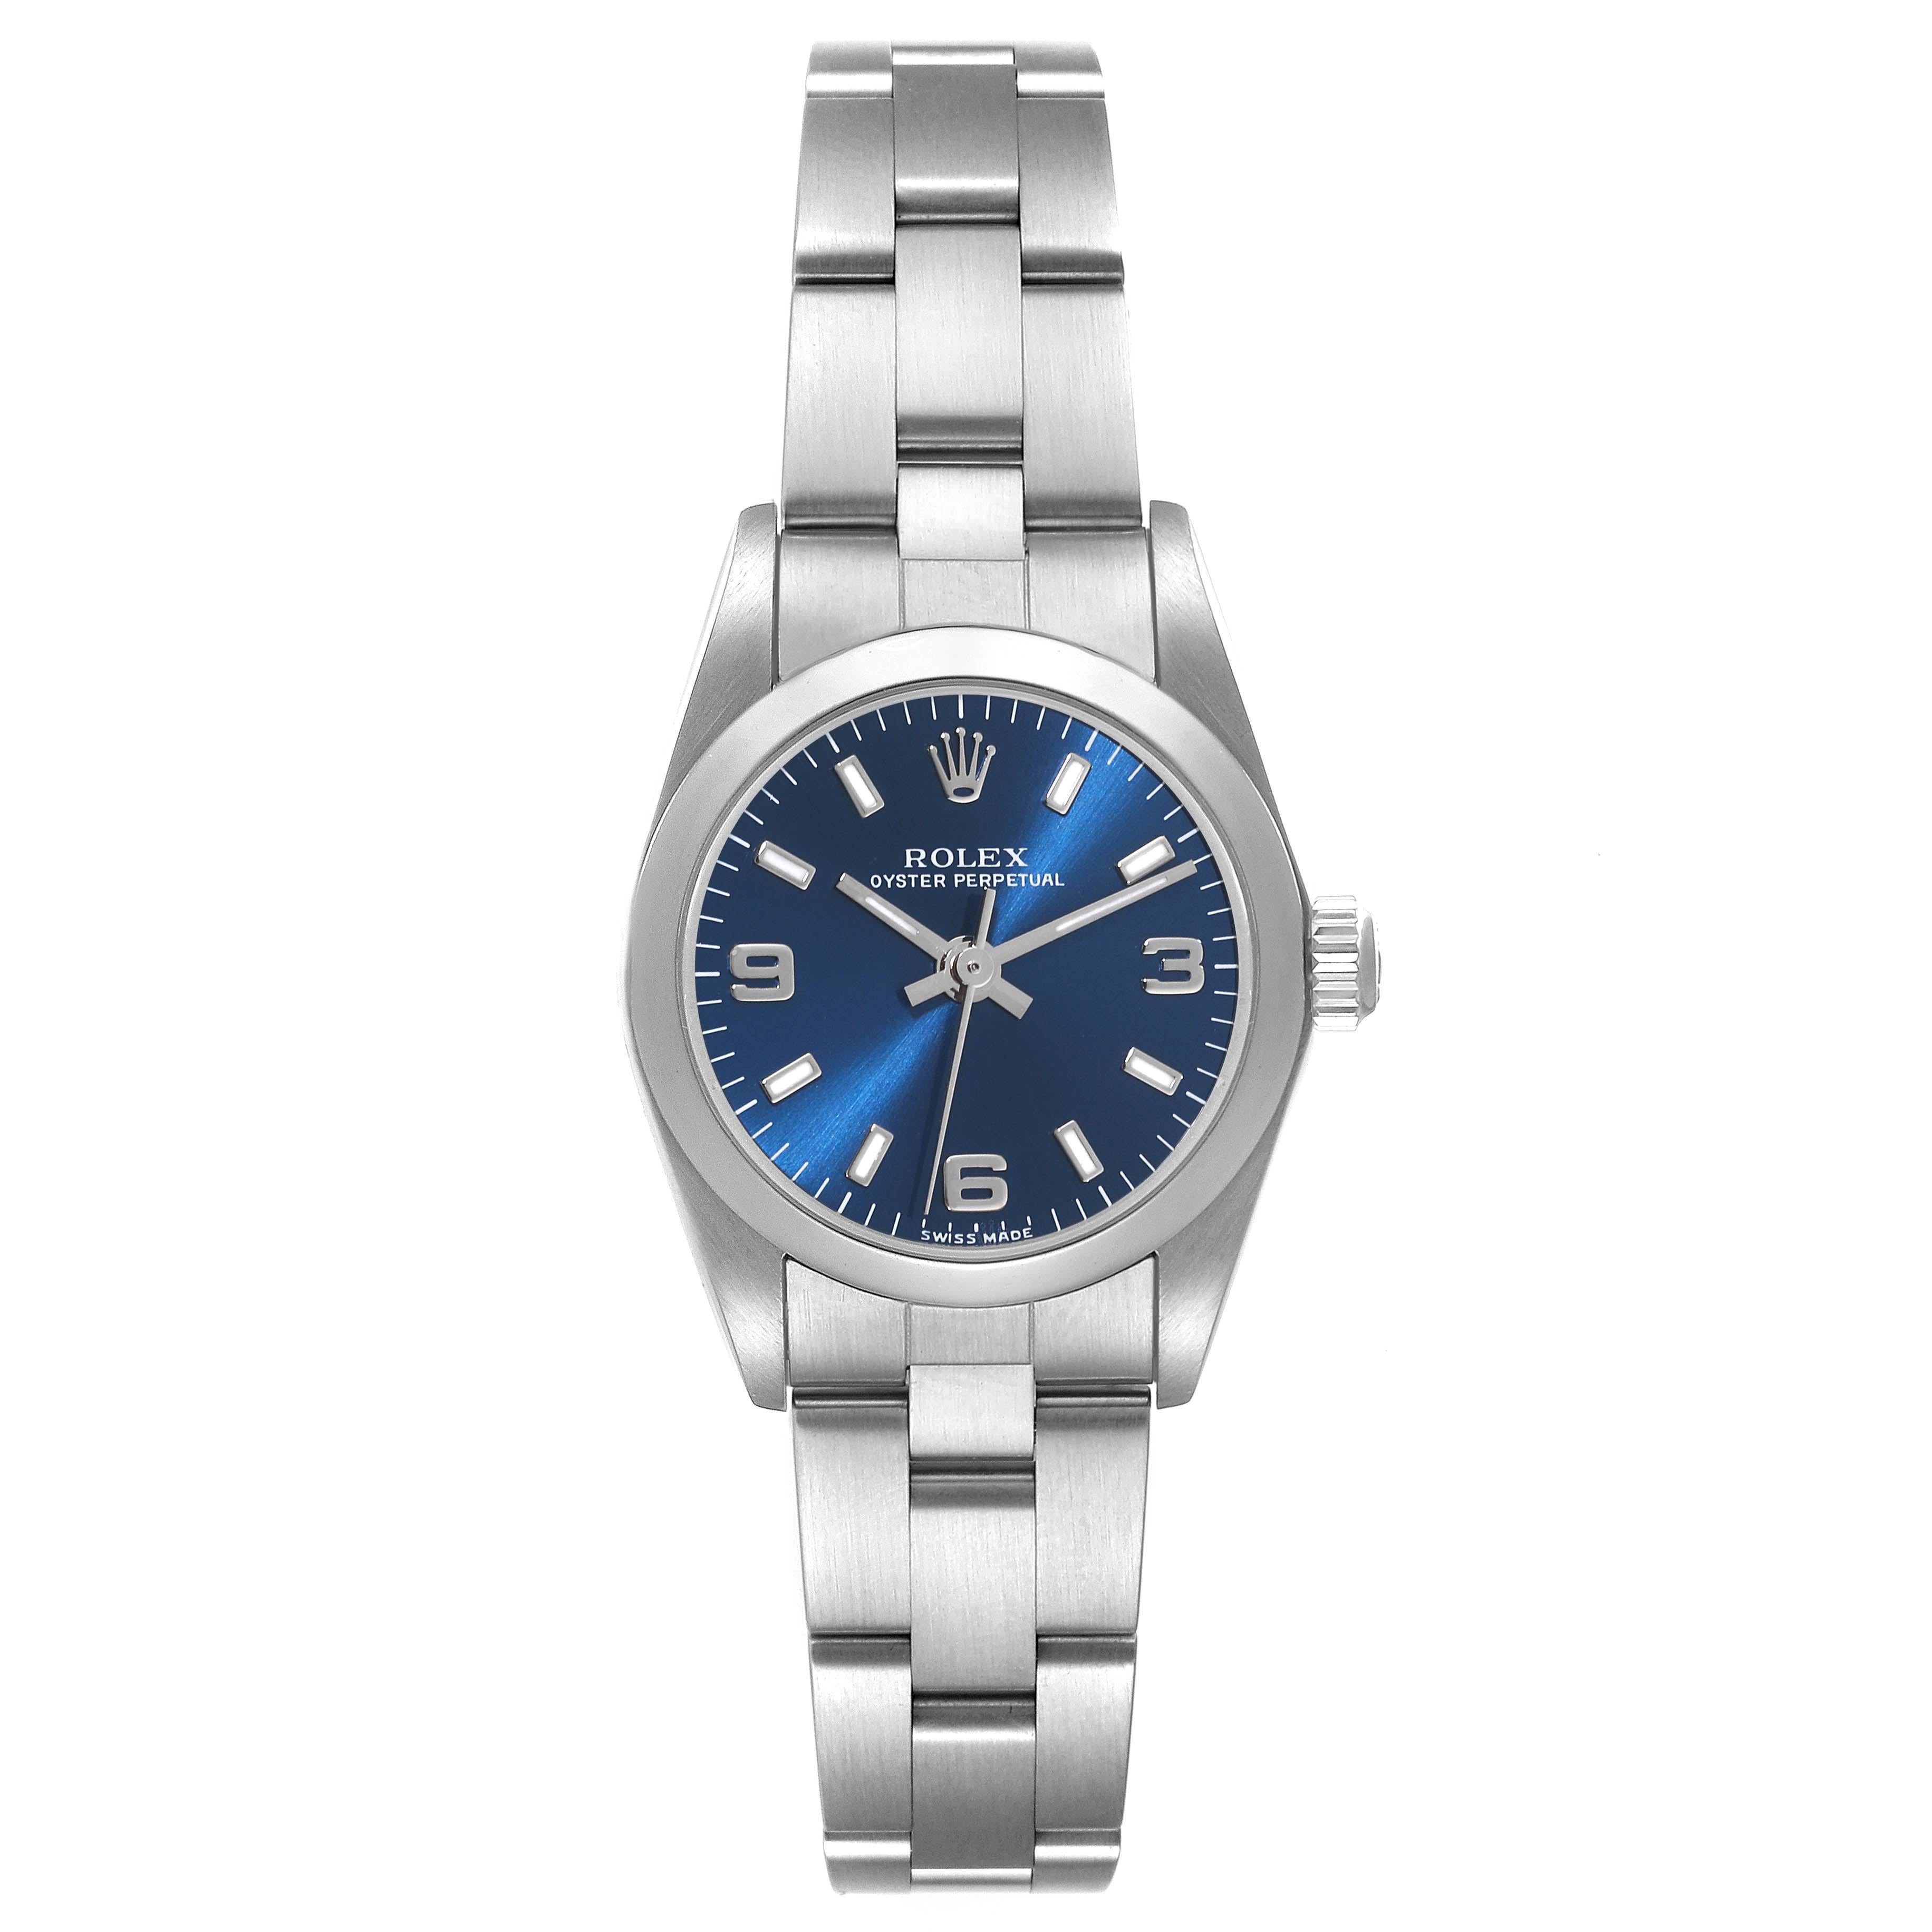 Rolex Oyster Perpetual Nondate Blue Dial Steel Ladies Watch 76080. Officially certified chronometer automatic self-winding movement. Stainless steel oyster case 24.0 mm in diameter. Rolex logo on a crown. Stainless steel smooth domed bezel. Scratch